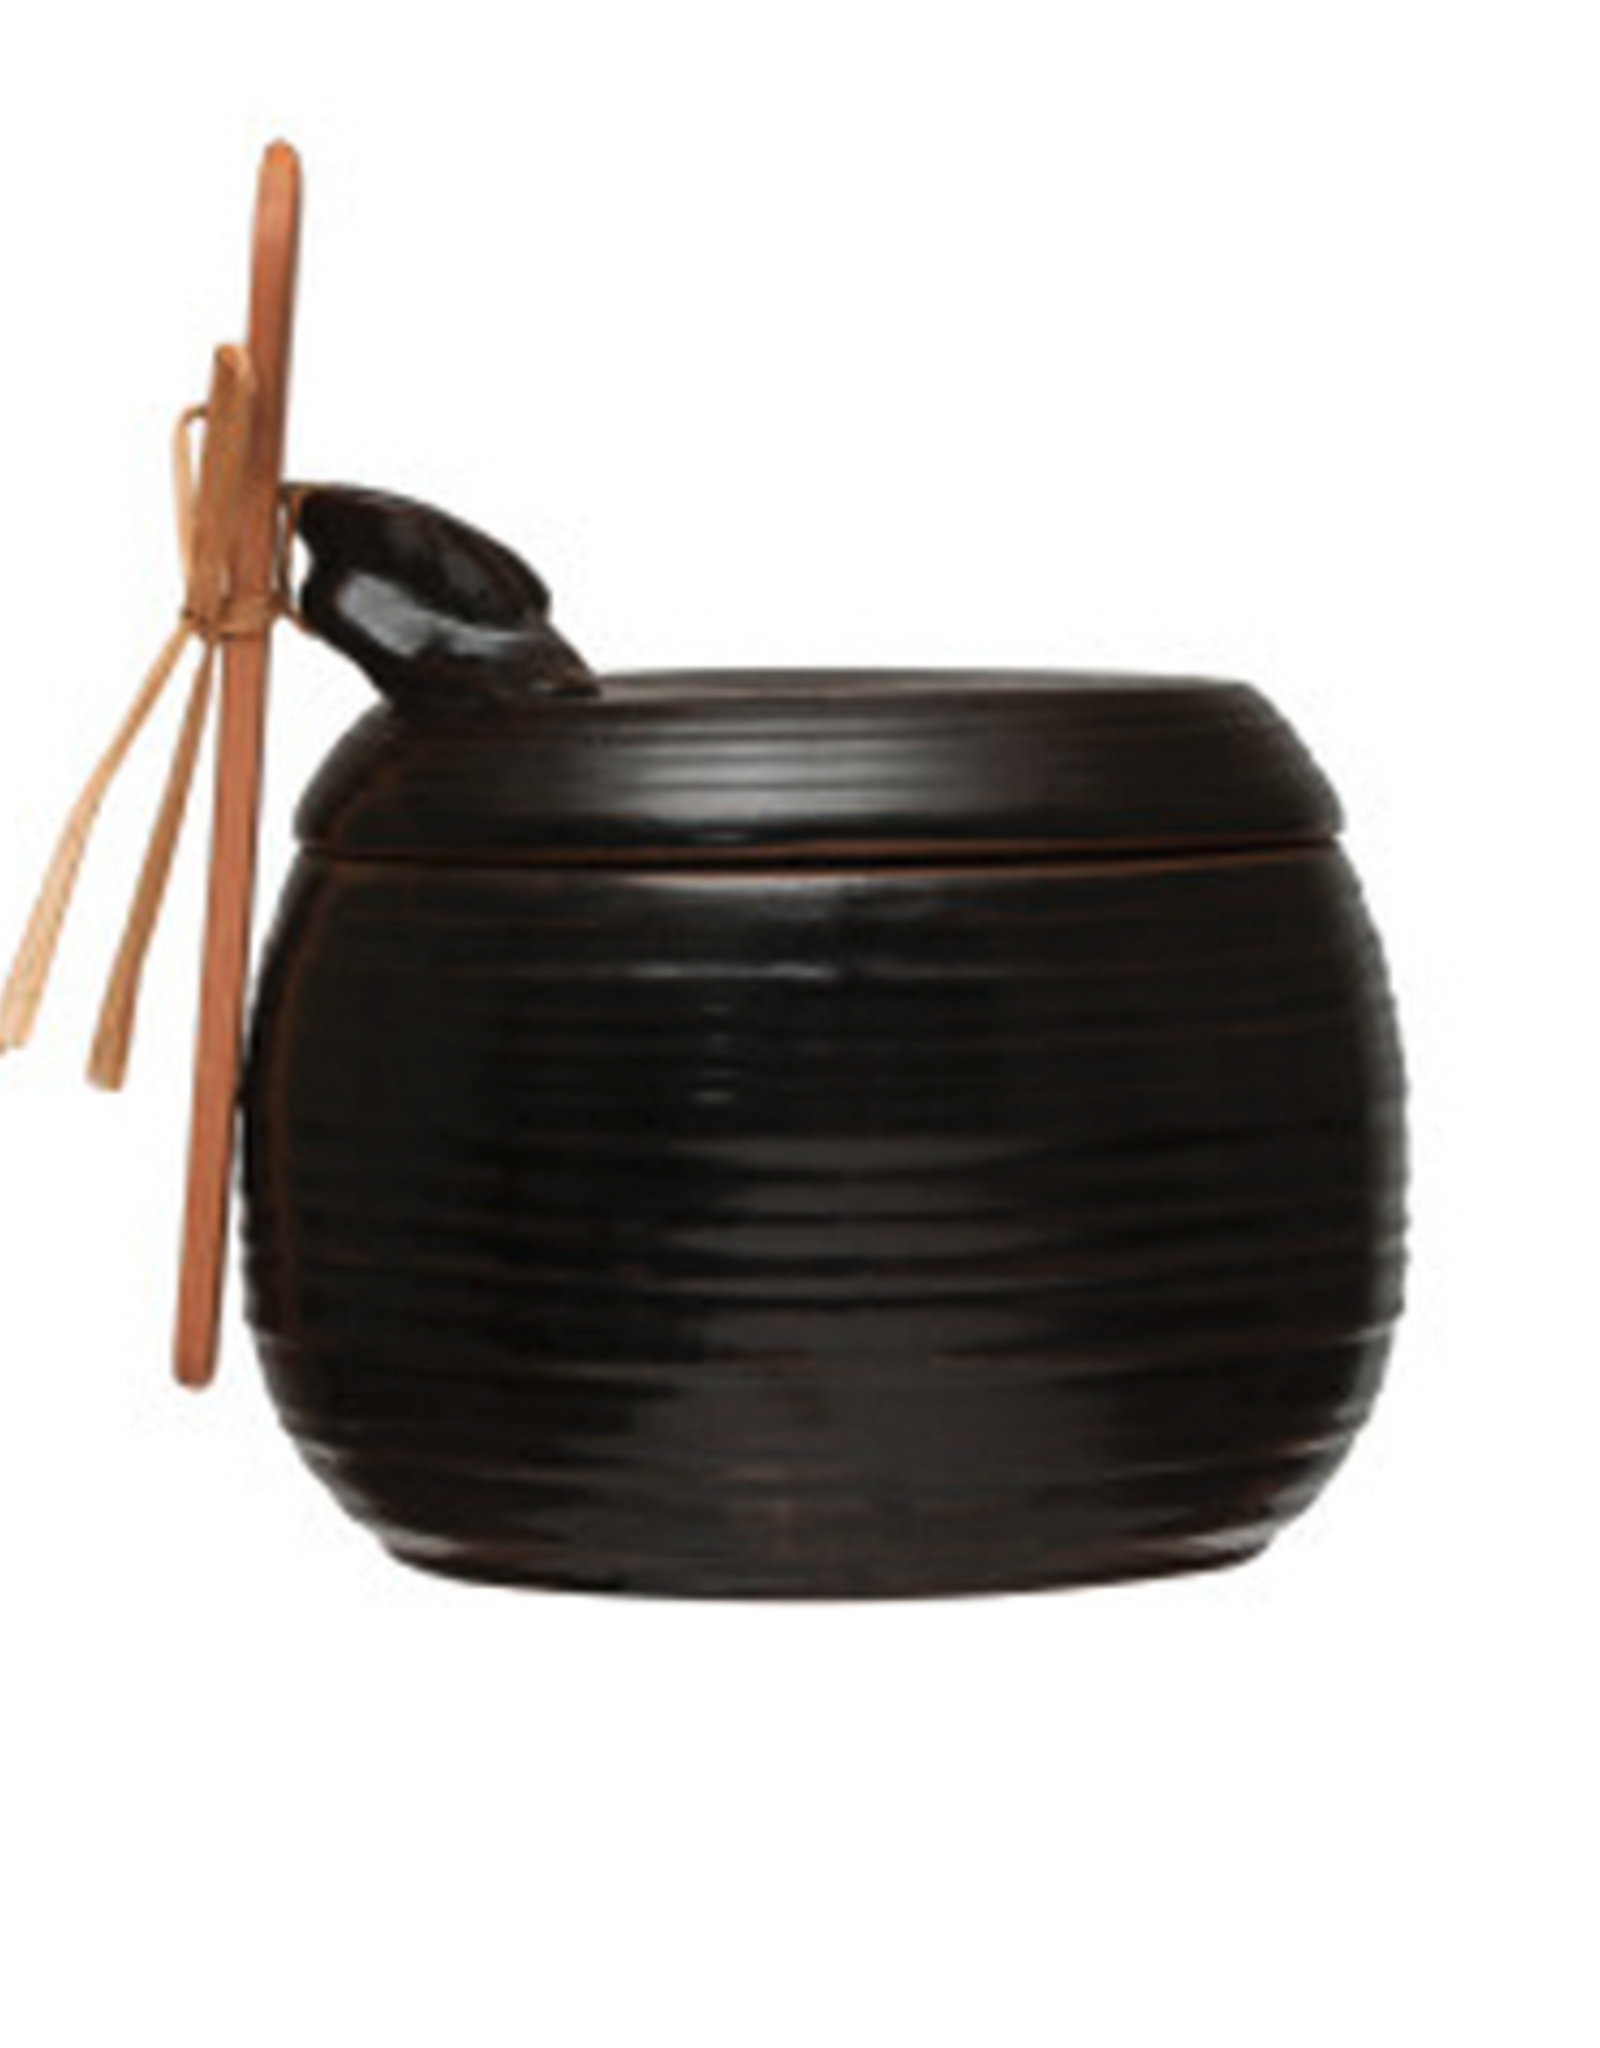 Black Jar with Lid and Spoon D4.75" H4.25"